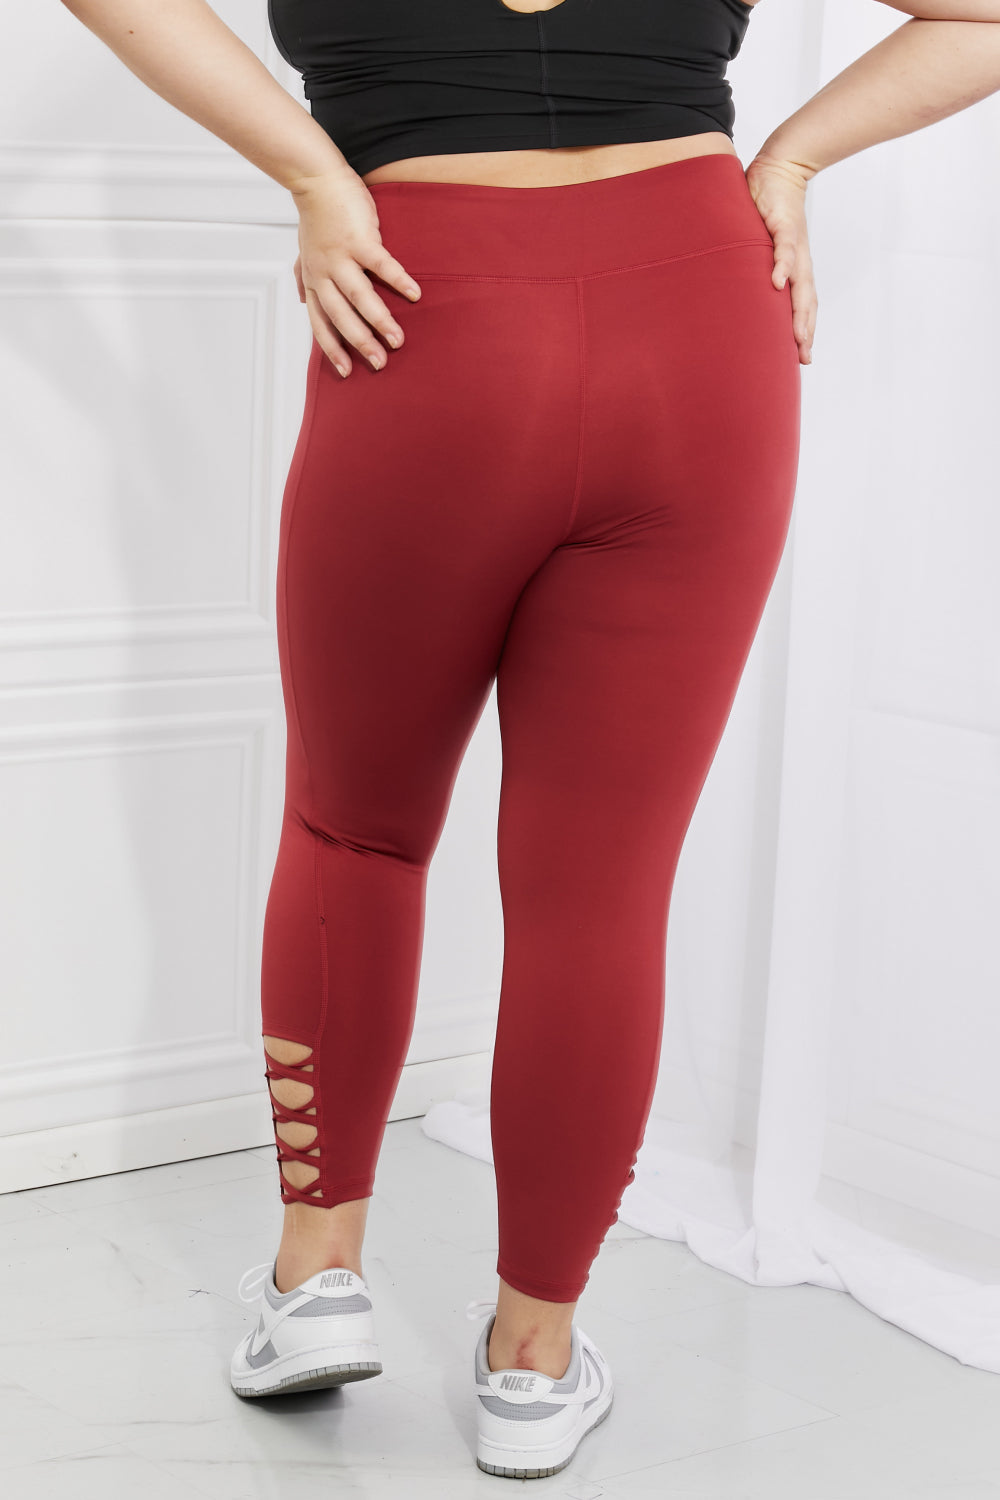 Ready For Action Ankle Cutout Active Leggings in Brick Red  Southern Soul Collectives 